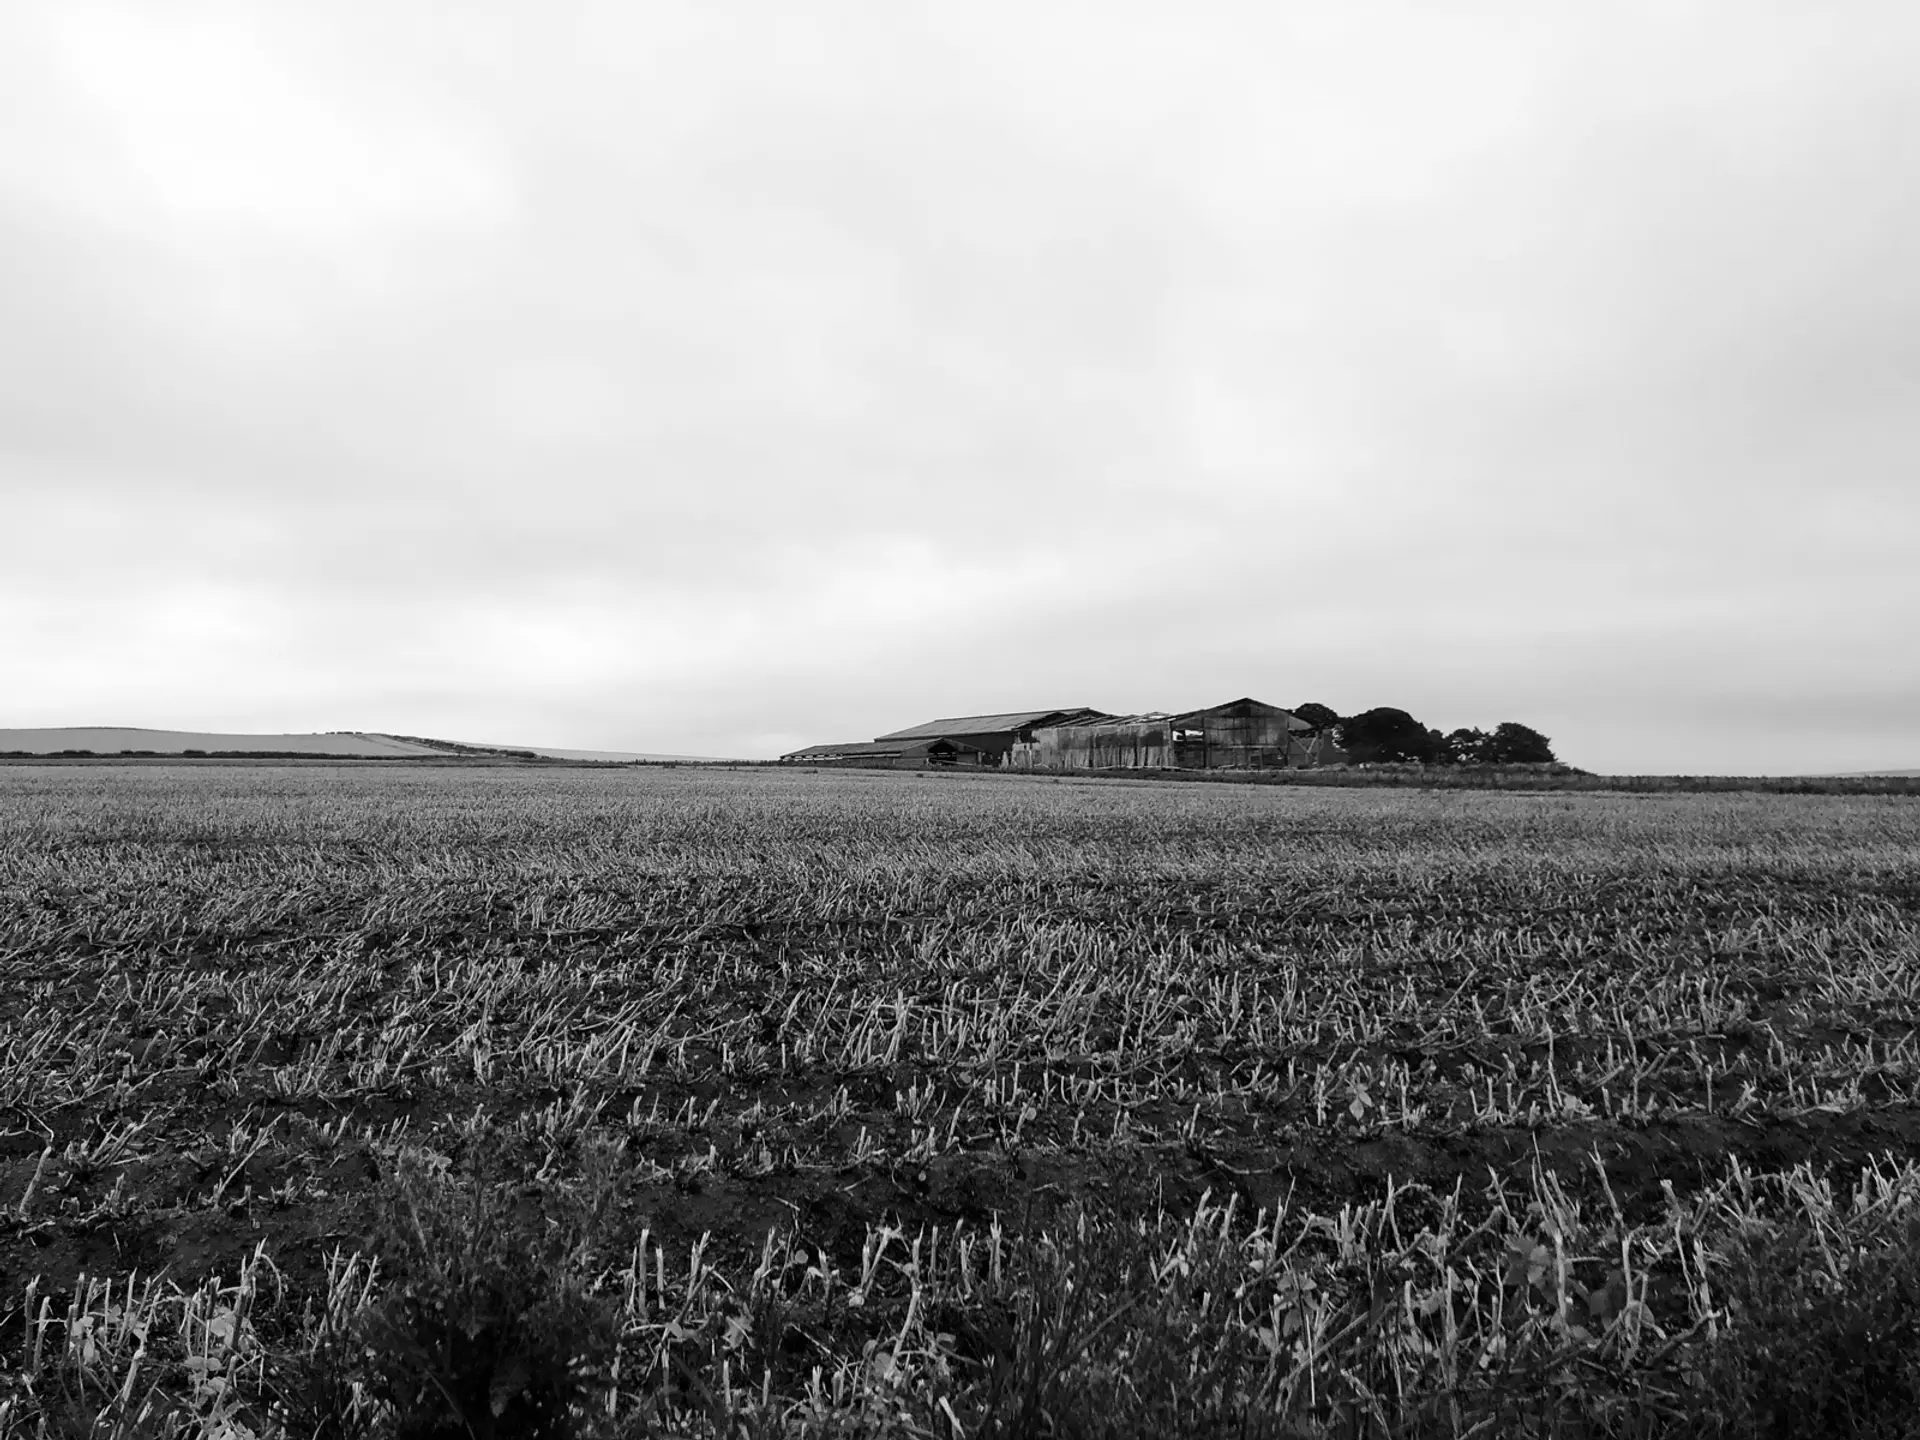 A grayscale image of a stubble field. In the distance on the horizon we can see 3 large barns, with trees next to them.